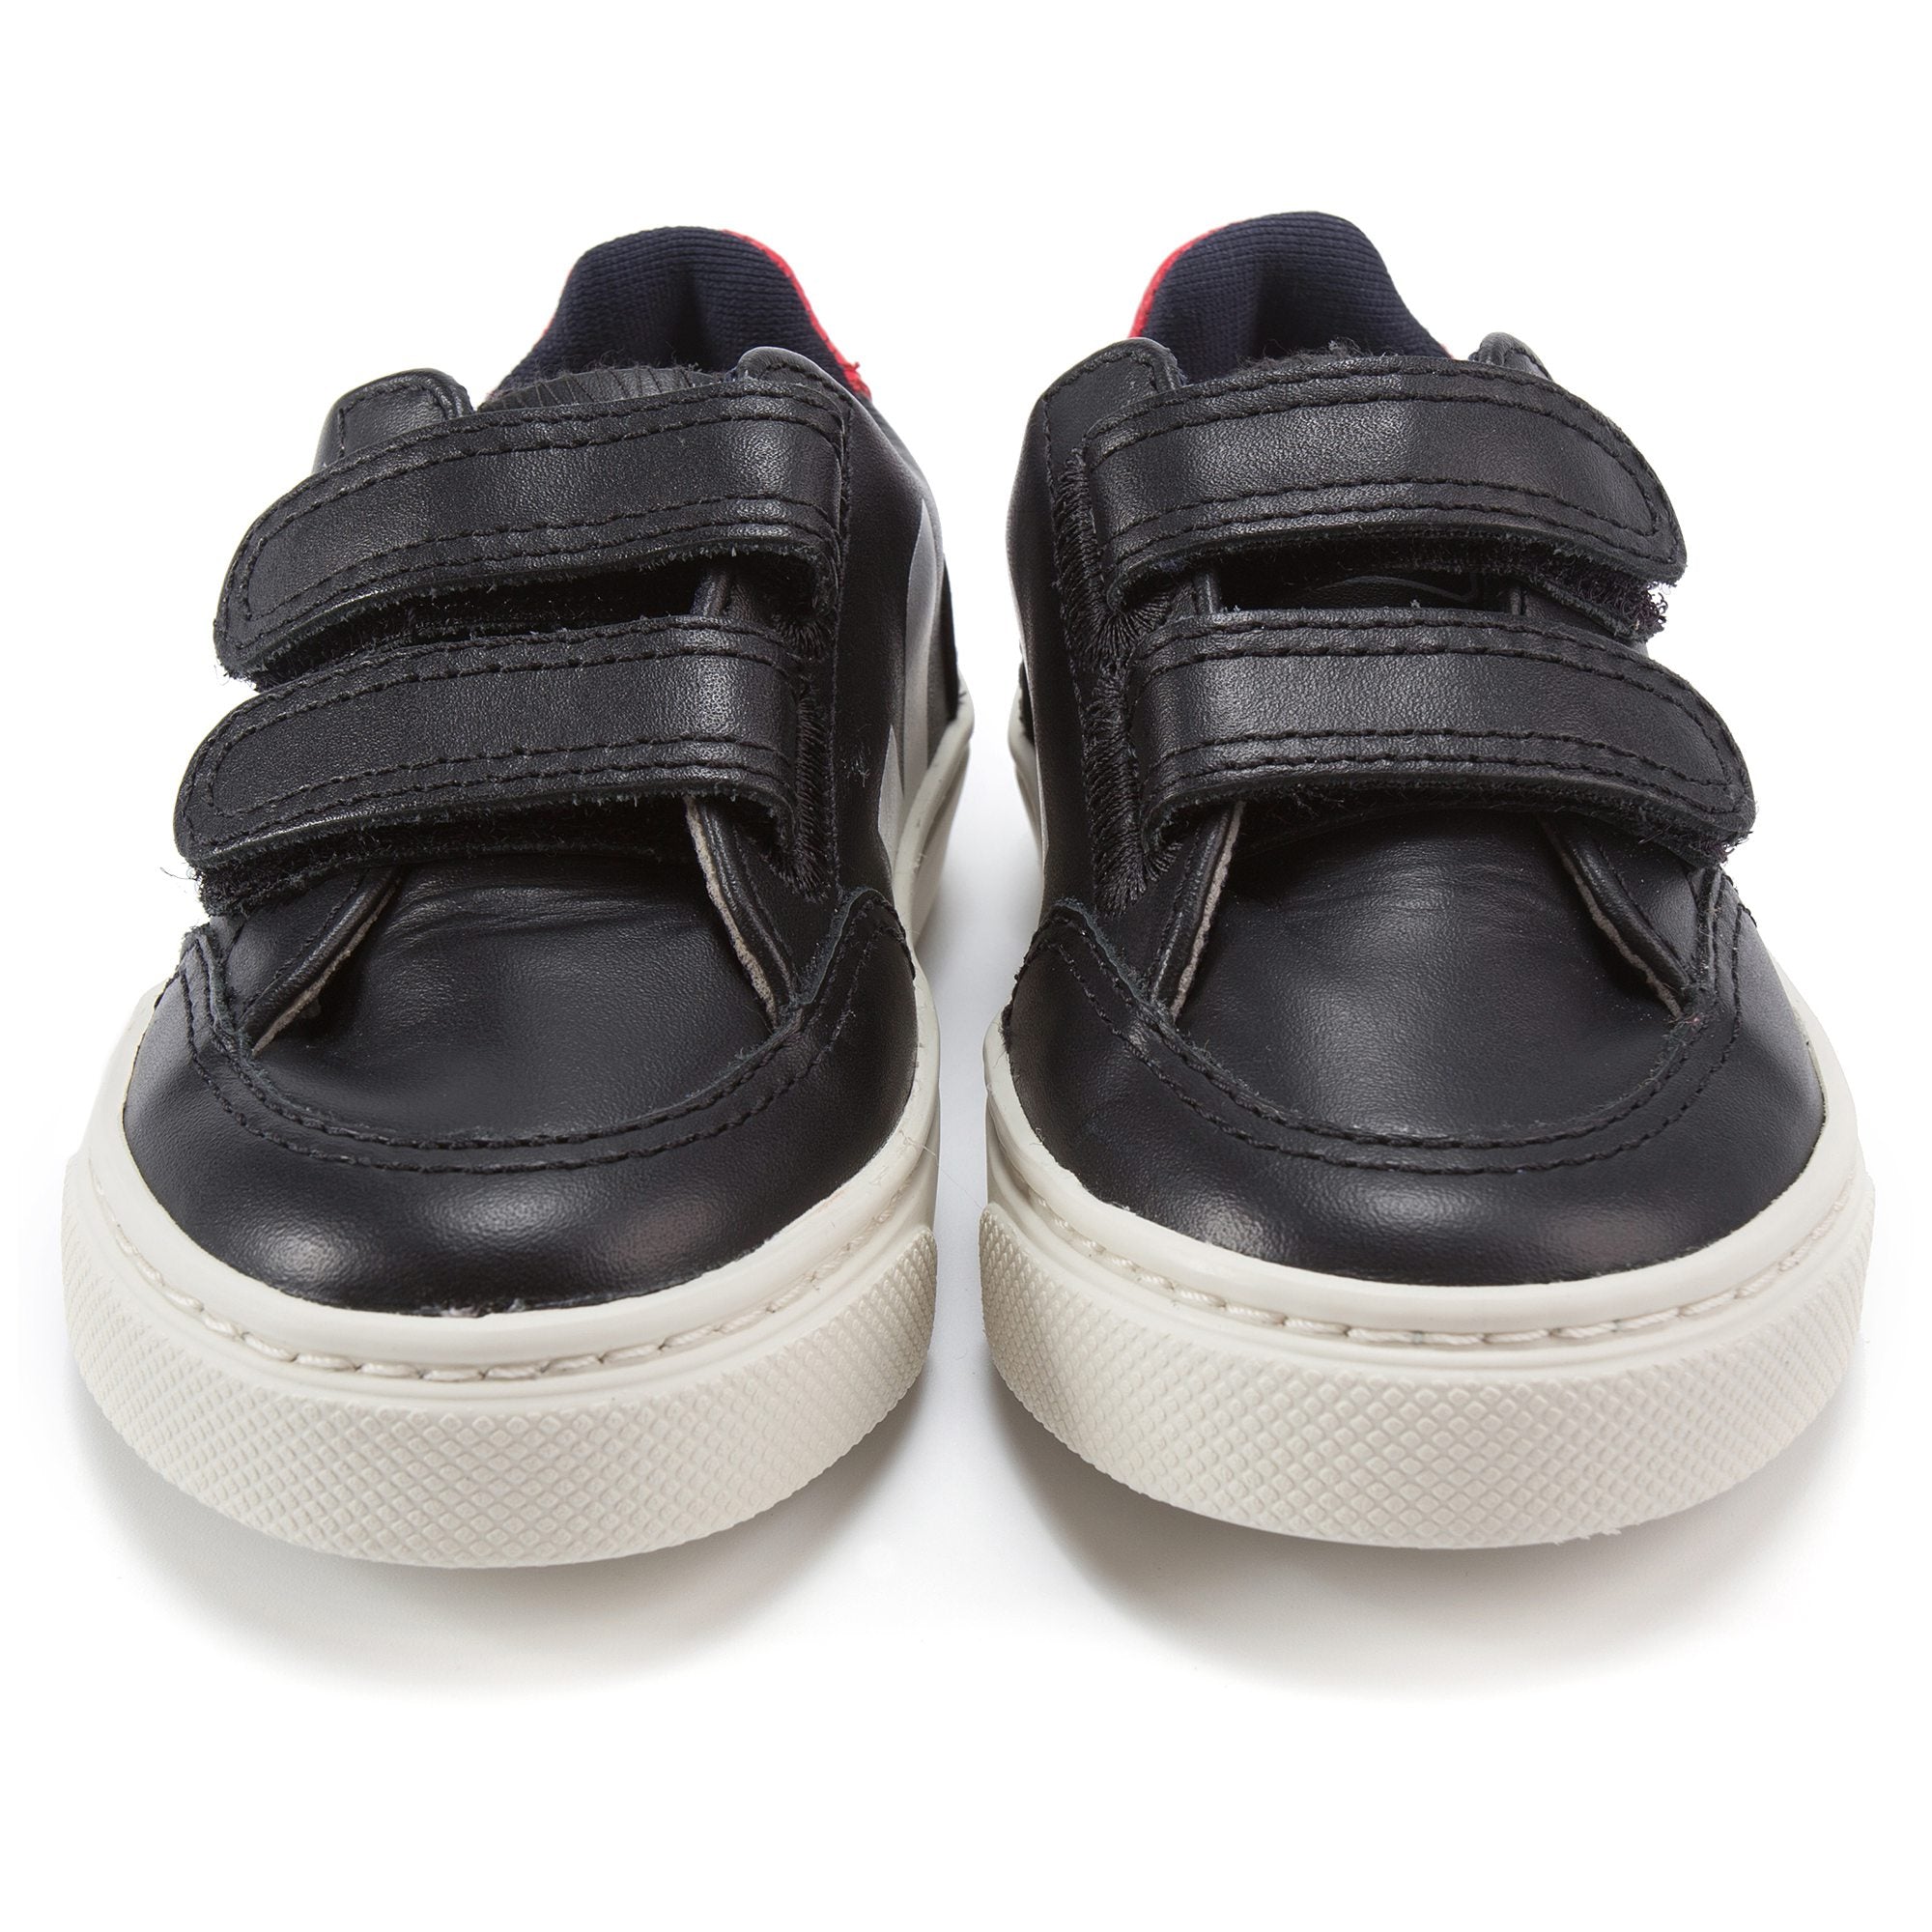 Baby Black Leather Velcro With White "V" Shoes